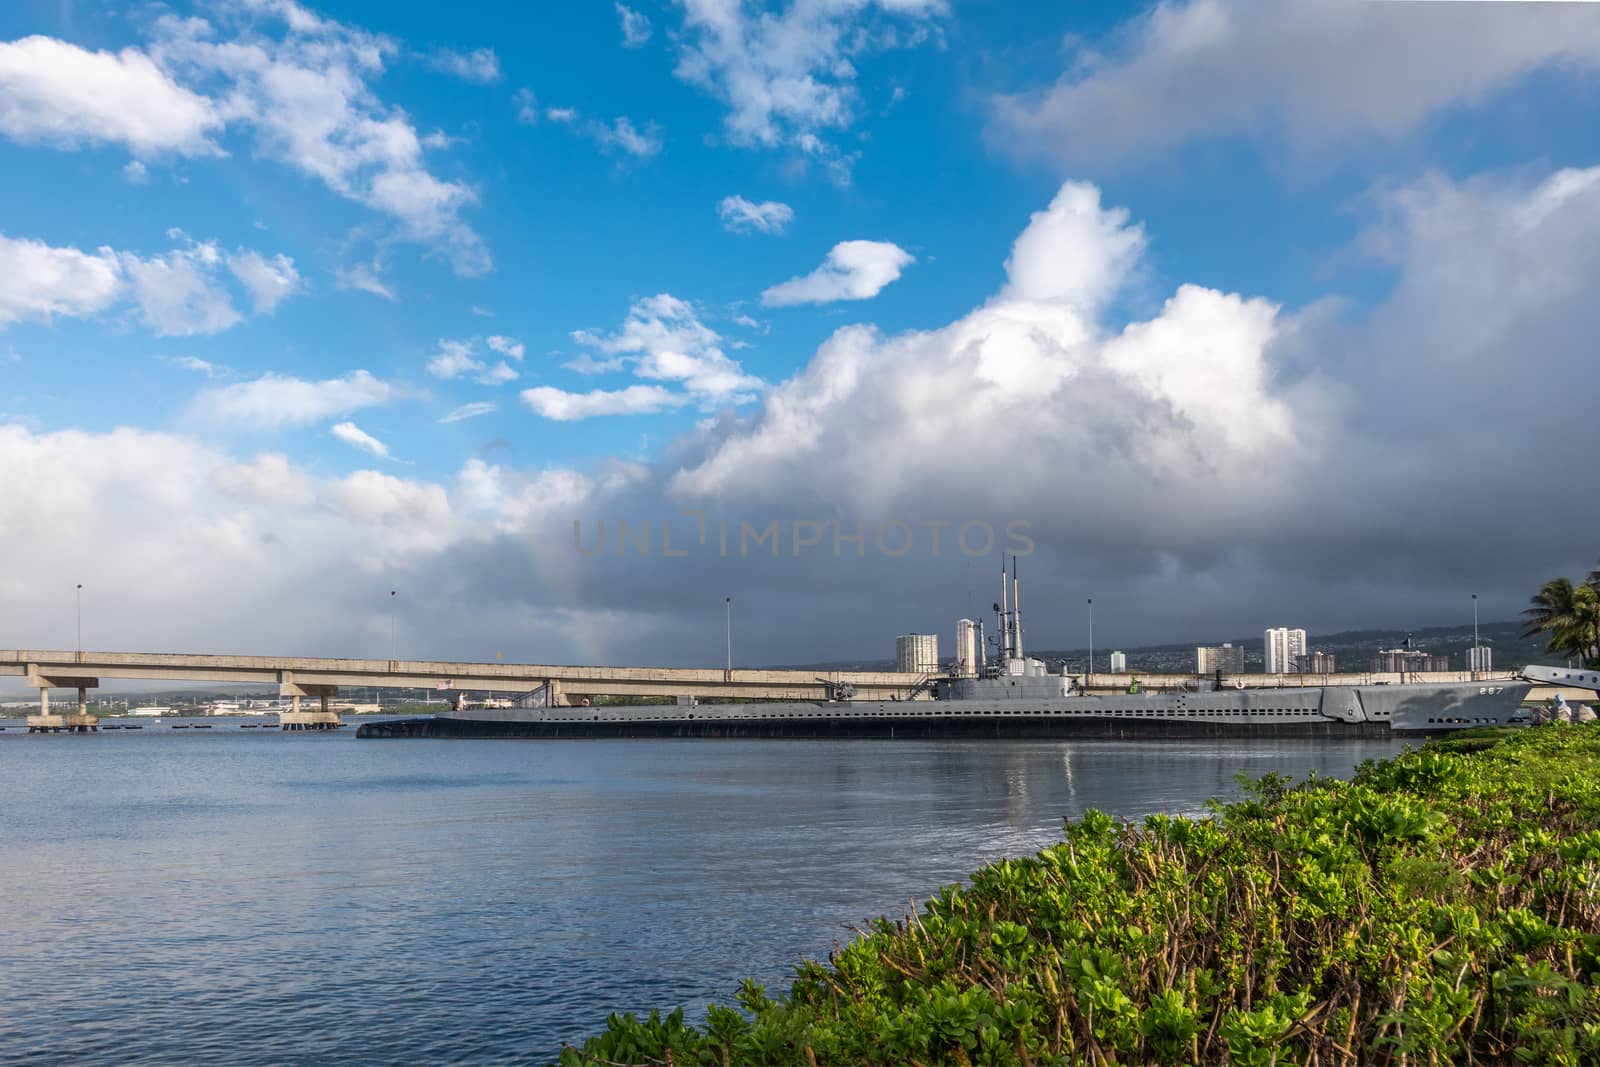 Oahu, Hawaii, USA. - January 10, 2020: Pearl Harbor. Wide shot shows long submarine USS Bowfin sticking out of gray water under blue cloudscape. Ford Island bridge lines up with boat. Green foliage up front.